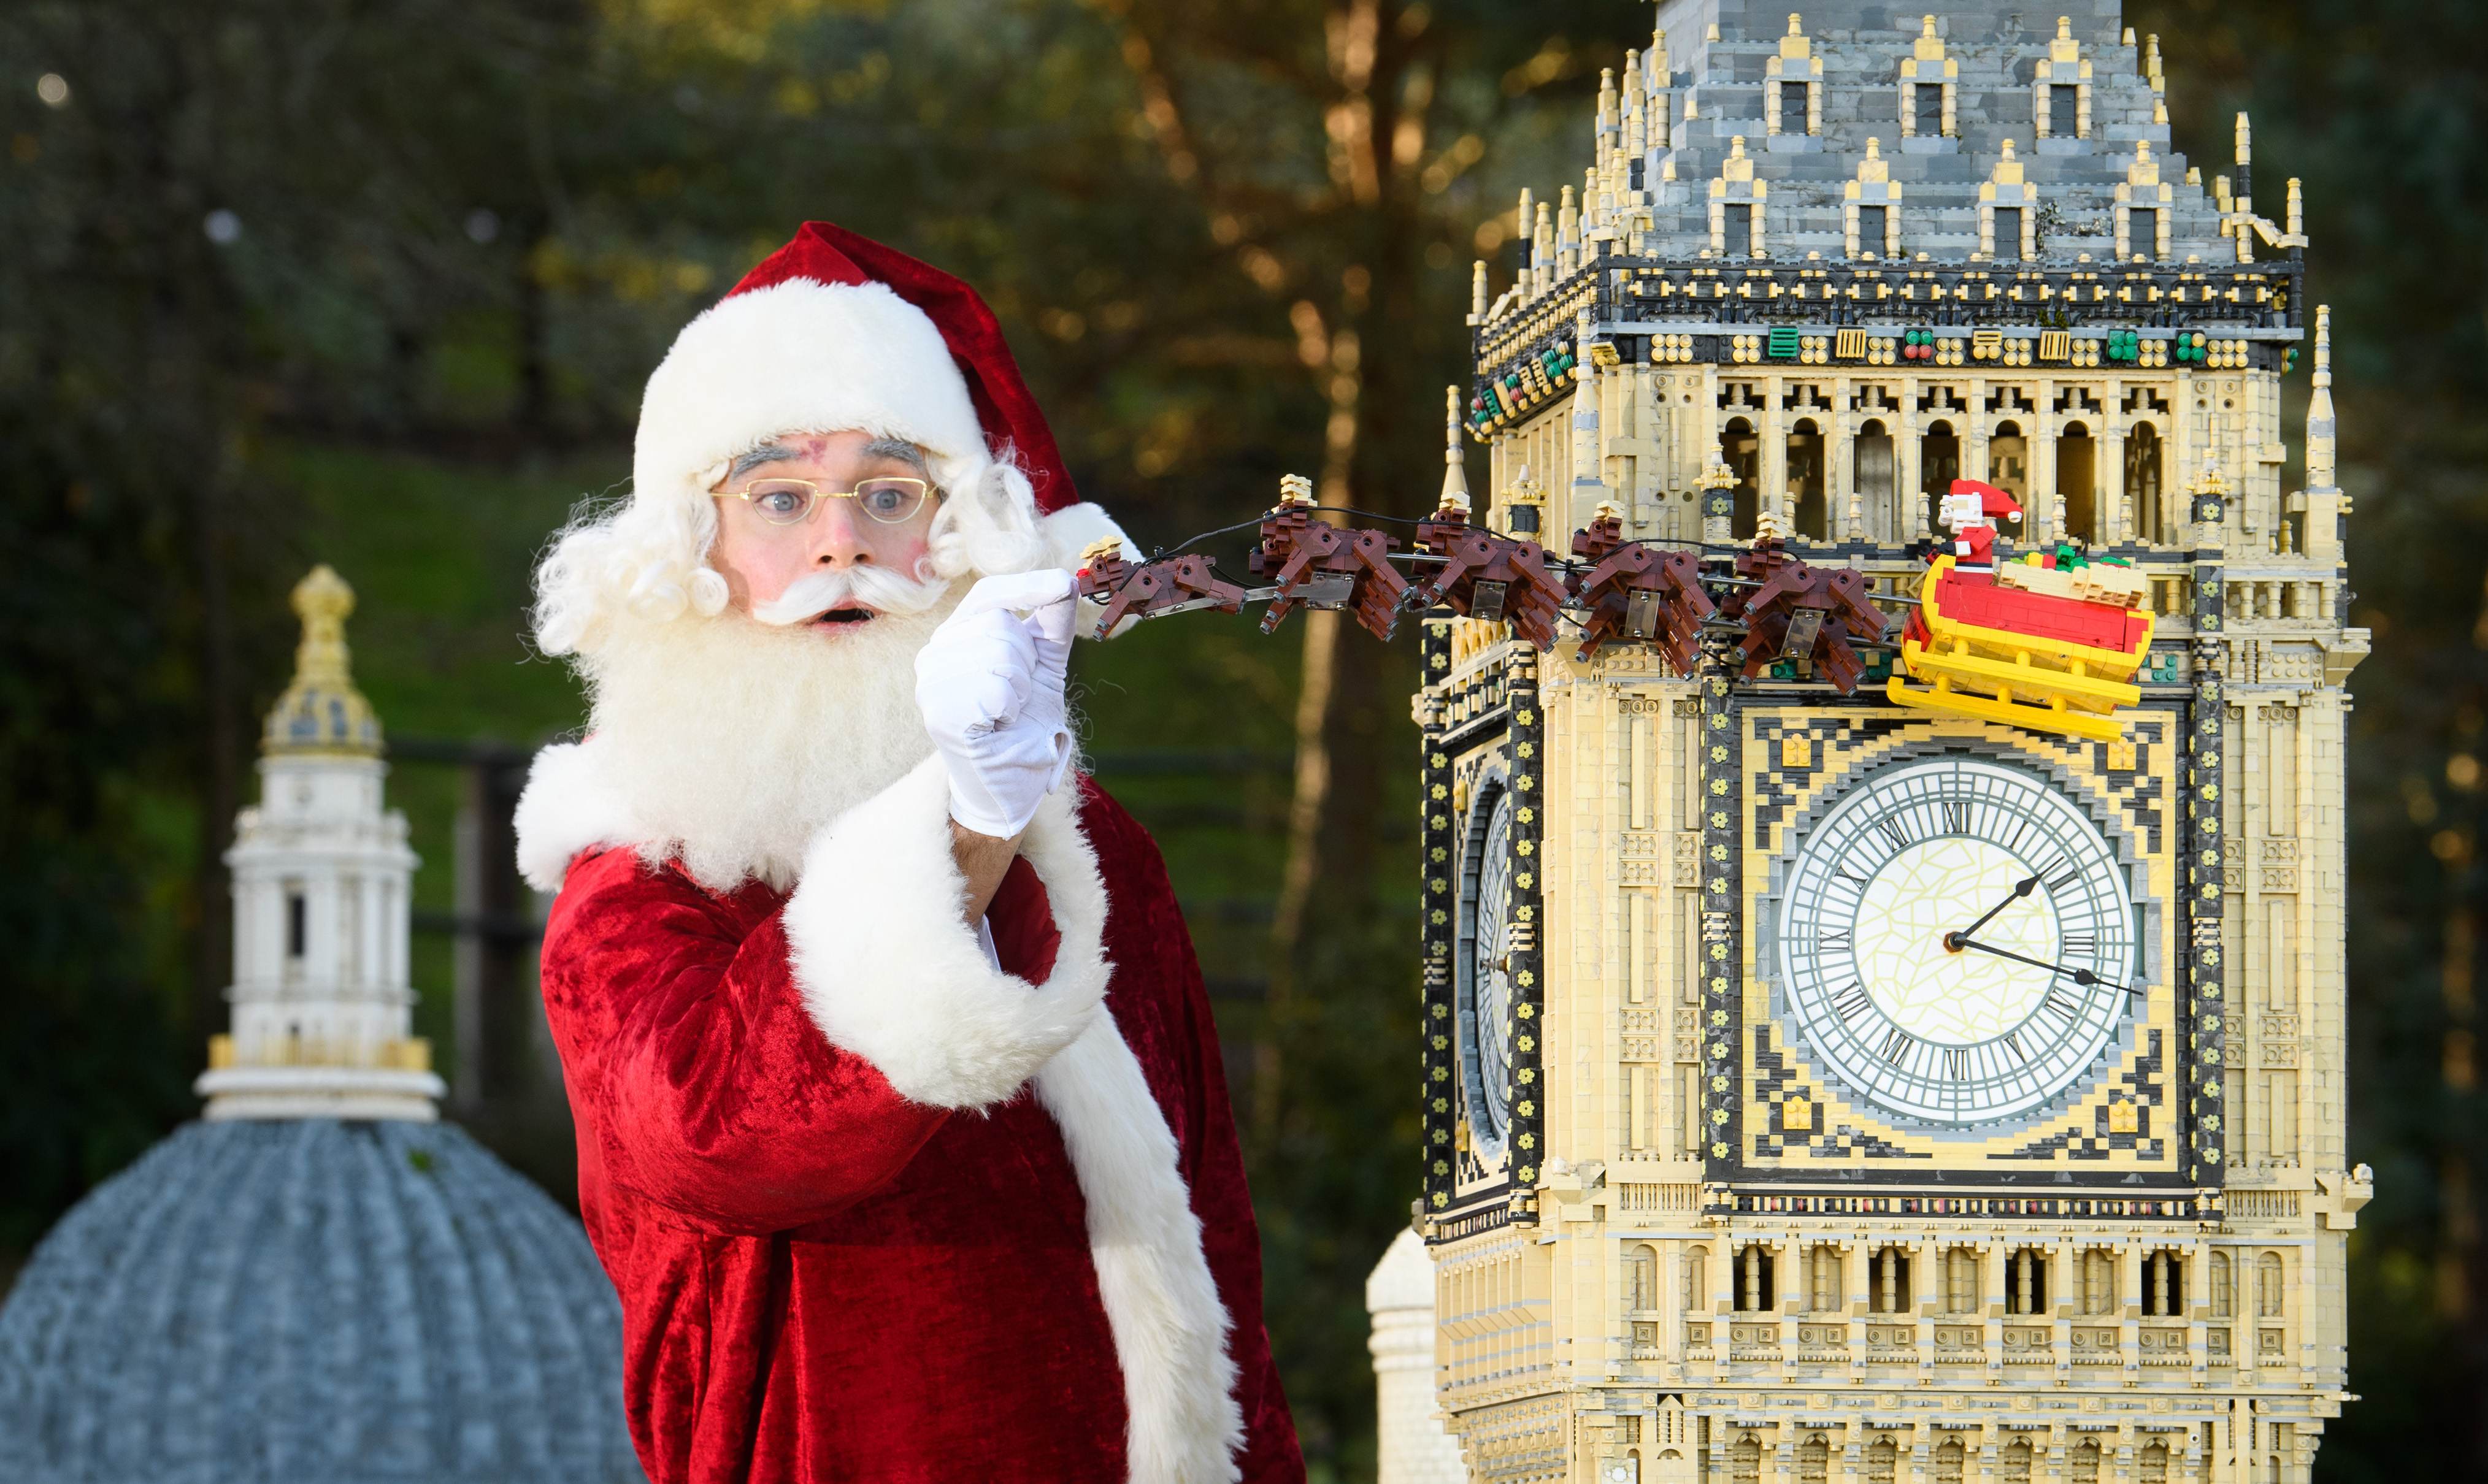 Father Christmas adding finishing touches to LEGO sleigh in front of Big Ben